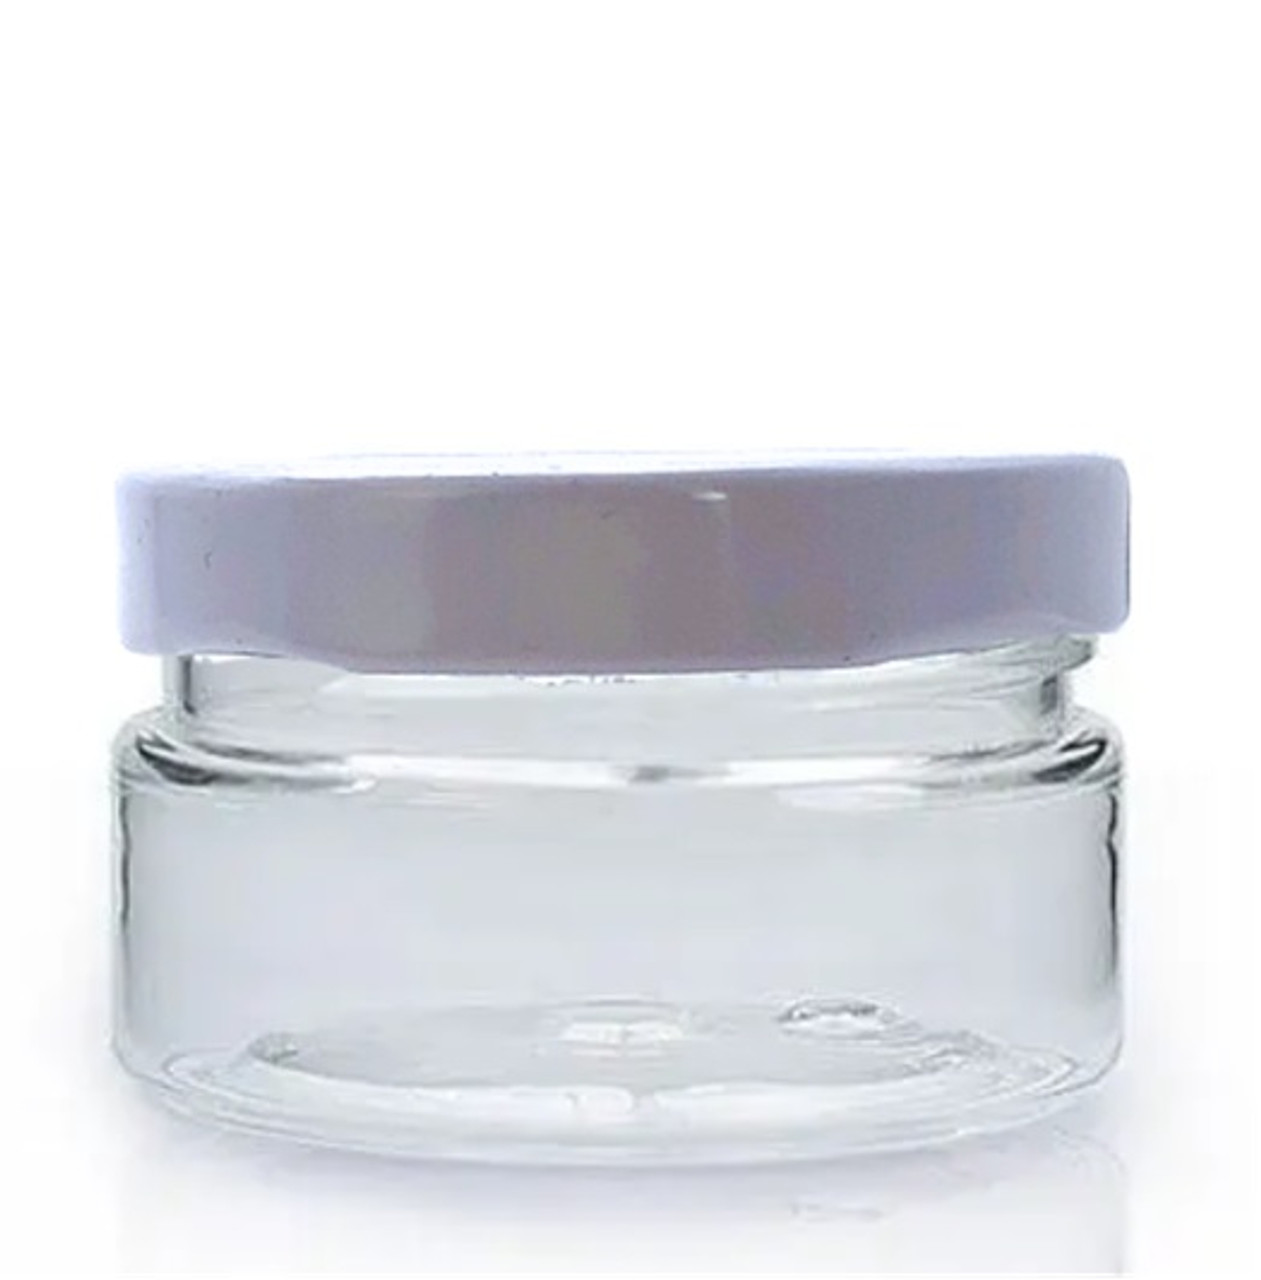 35ml PET Clear 48mm Screw Neck Jar includes 43mm white Aluminium twist off cap with compound liner ( see qty options )